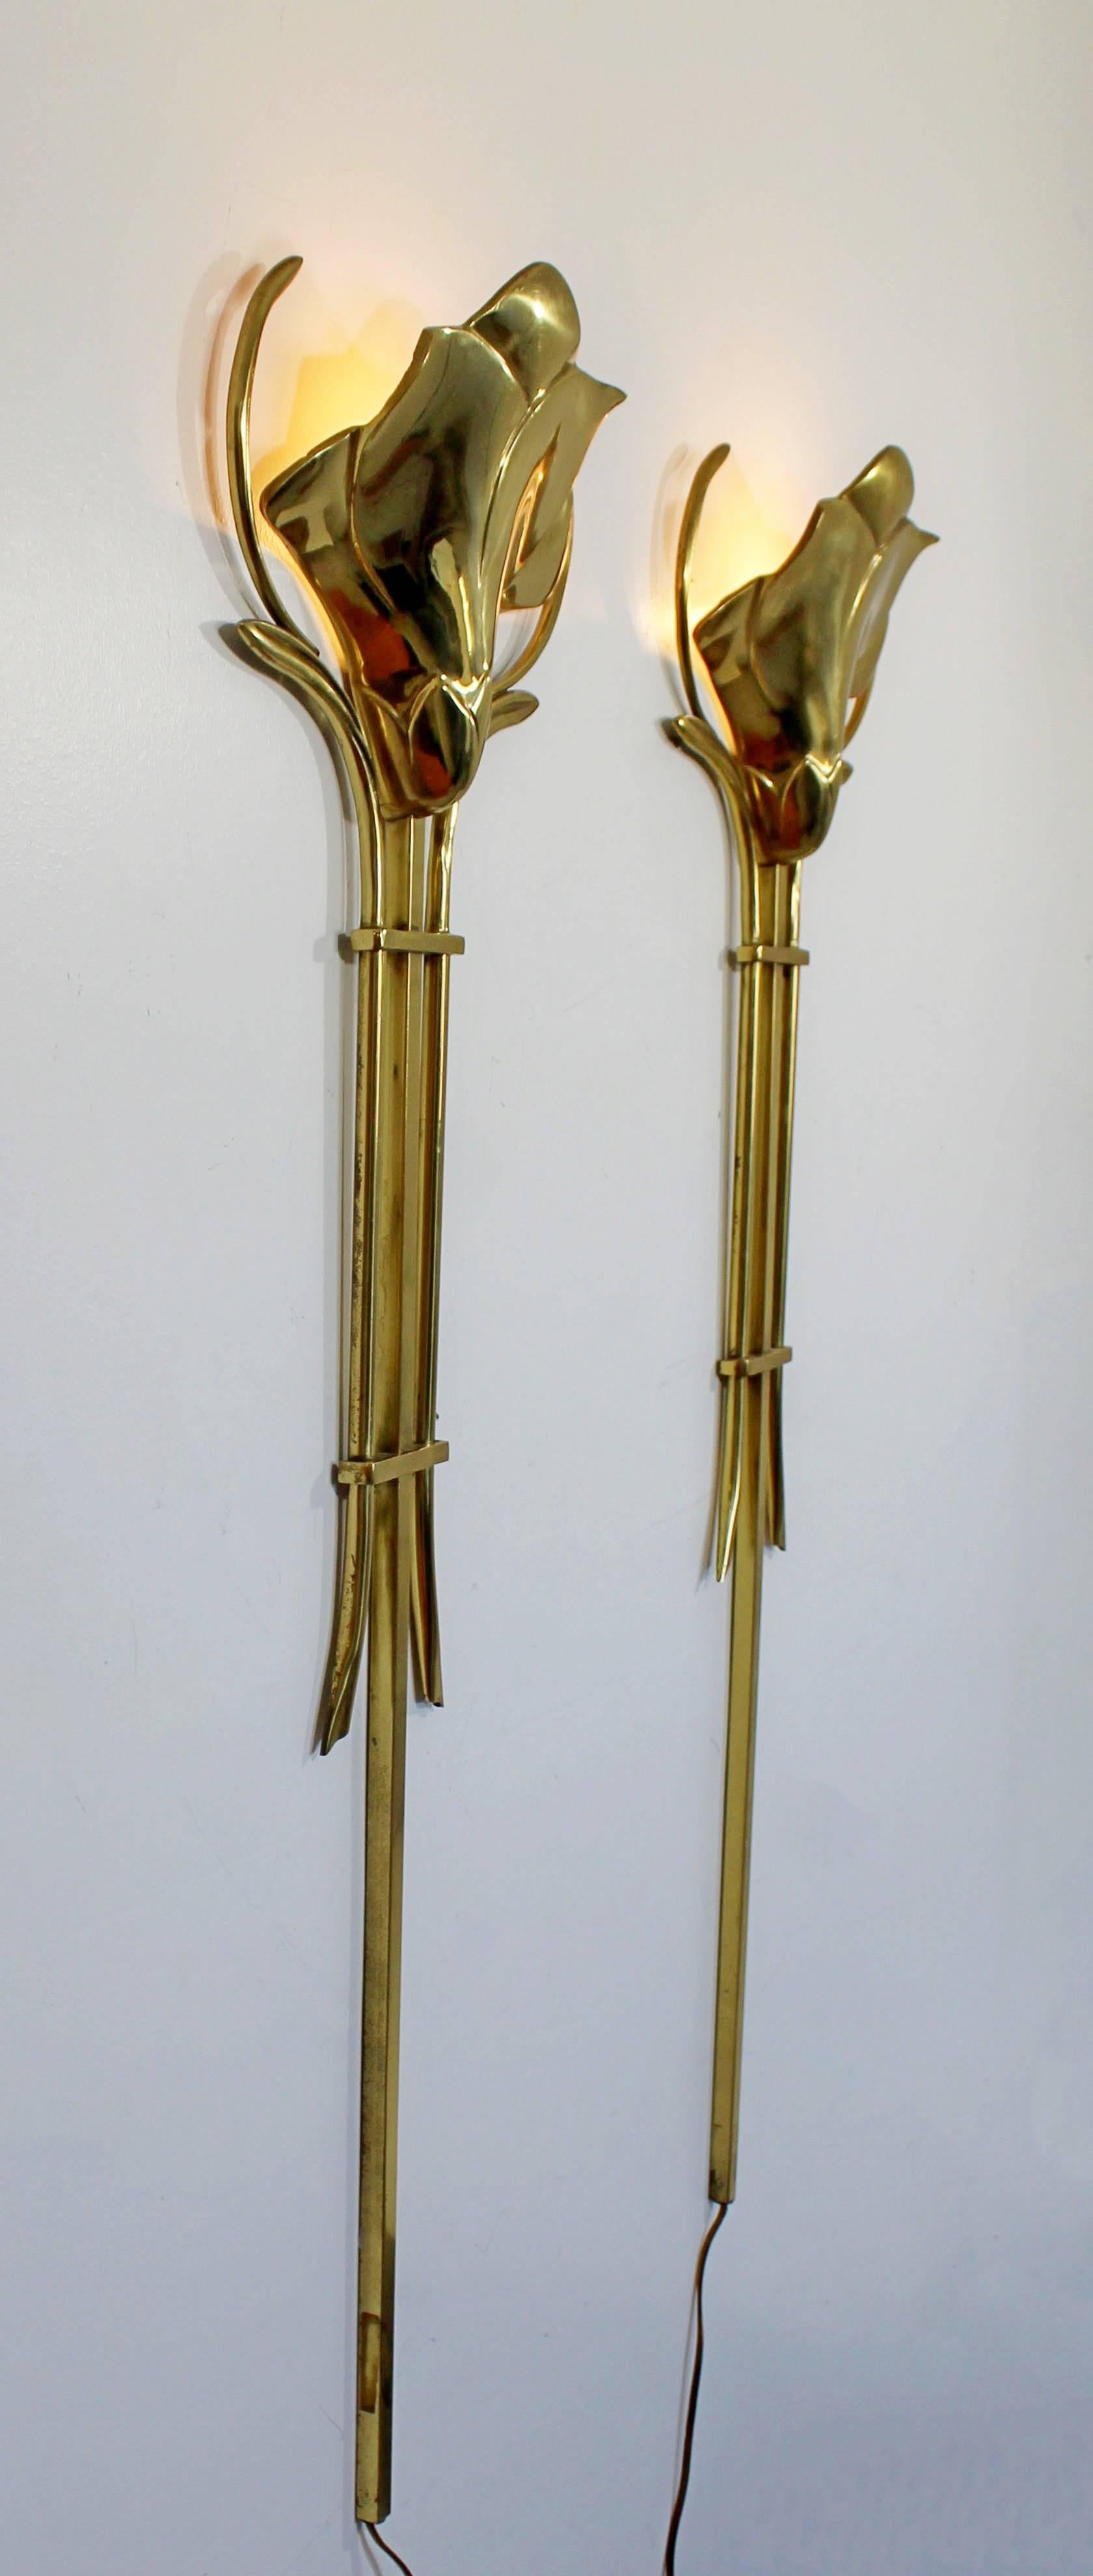 For your consideration is a magnificent, pair of brass, hanging, wall sconces, reminiscent of flowers, by Frederick Cooper, circa 1960s. In excellent condition. The dimensions are 12